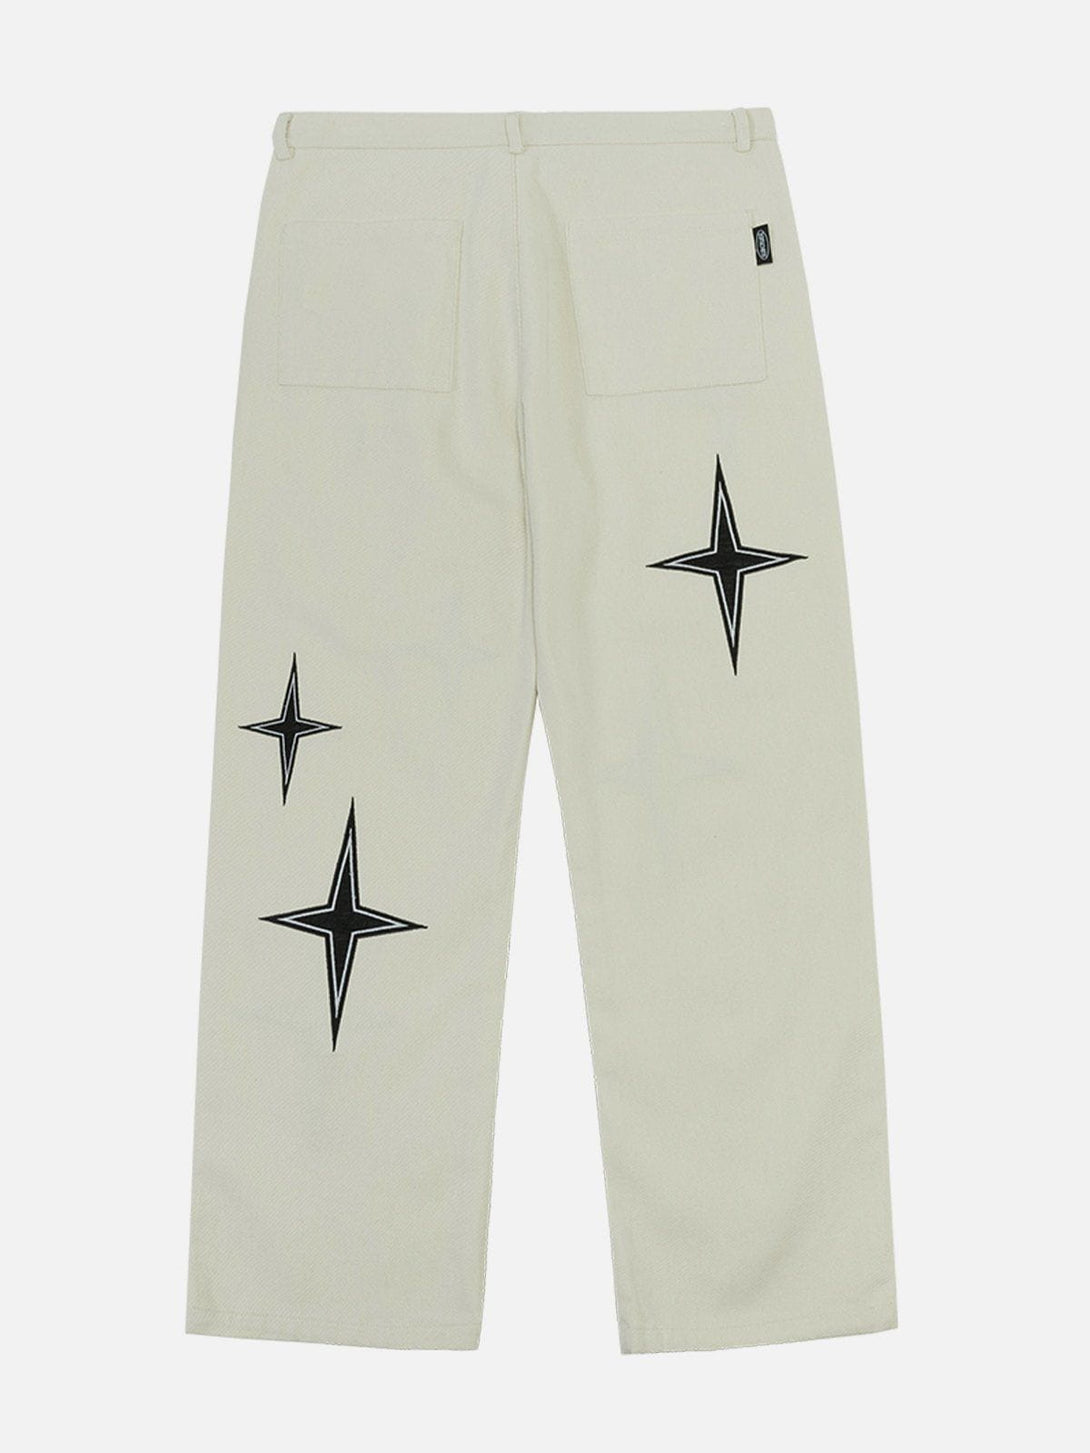 Levefly - Four-pointed Star Print Pants - Streetwear Fashion - levefly.com